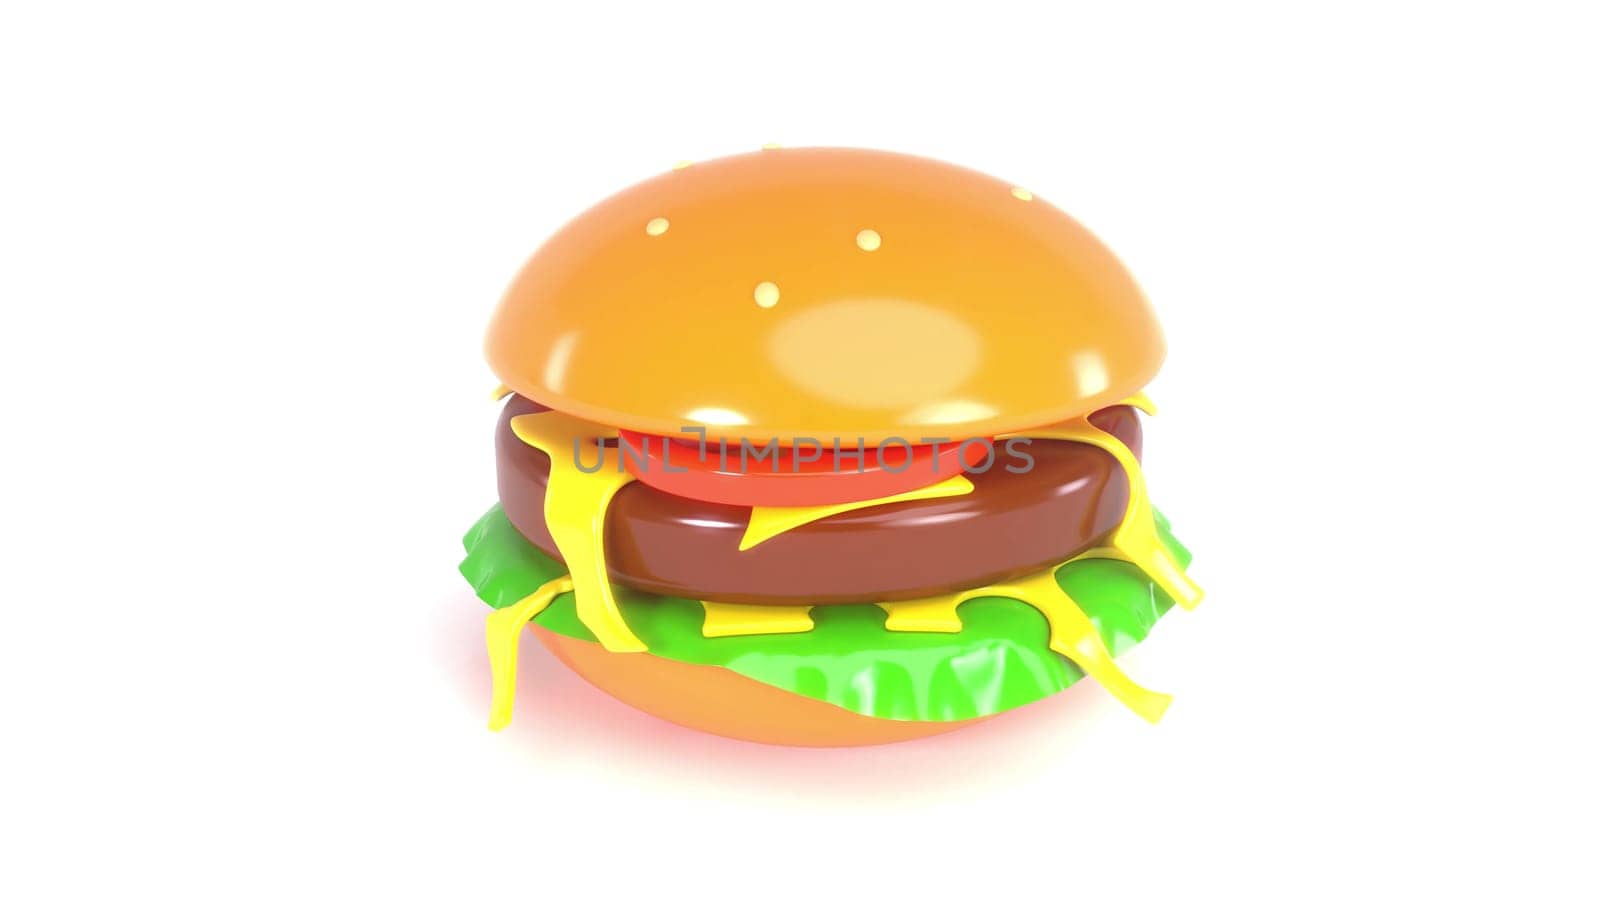 Fresh tasty burger comes together piece by piece 3d render